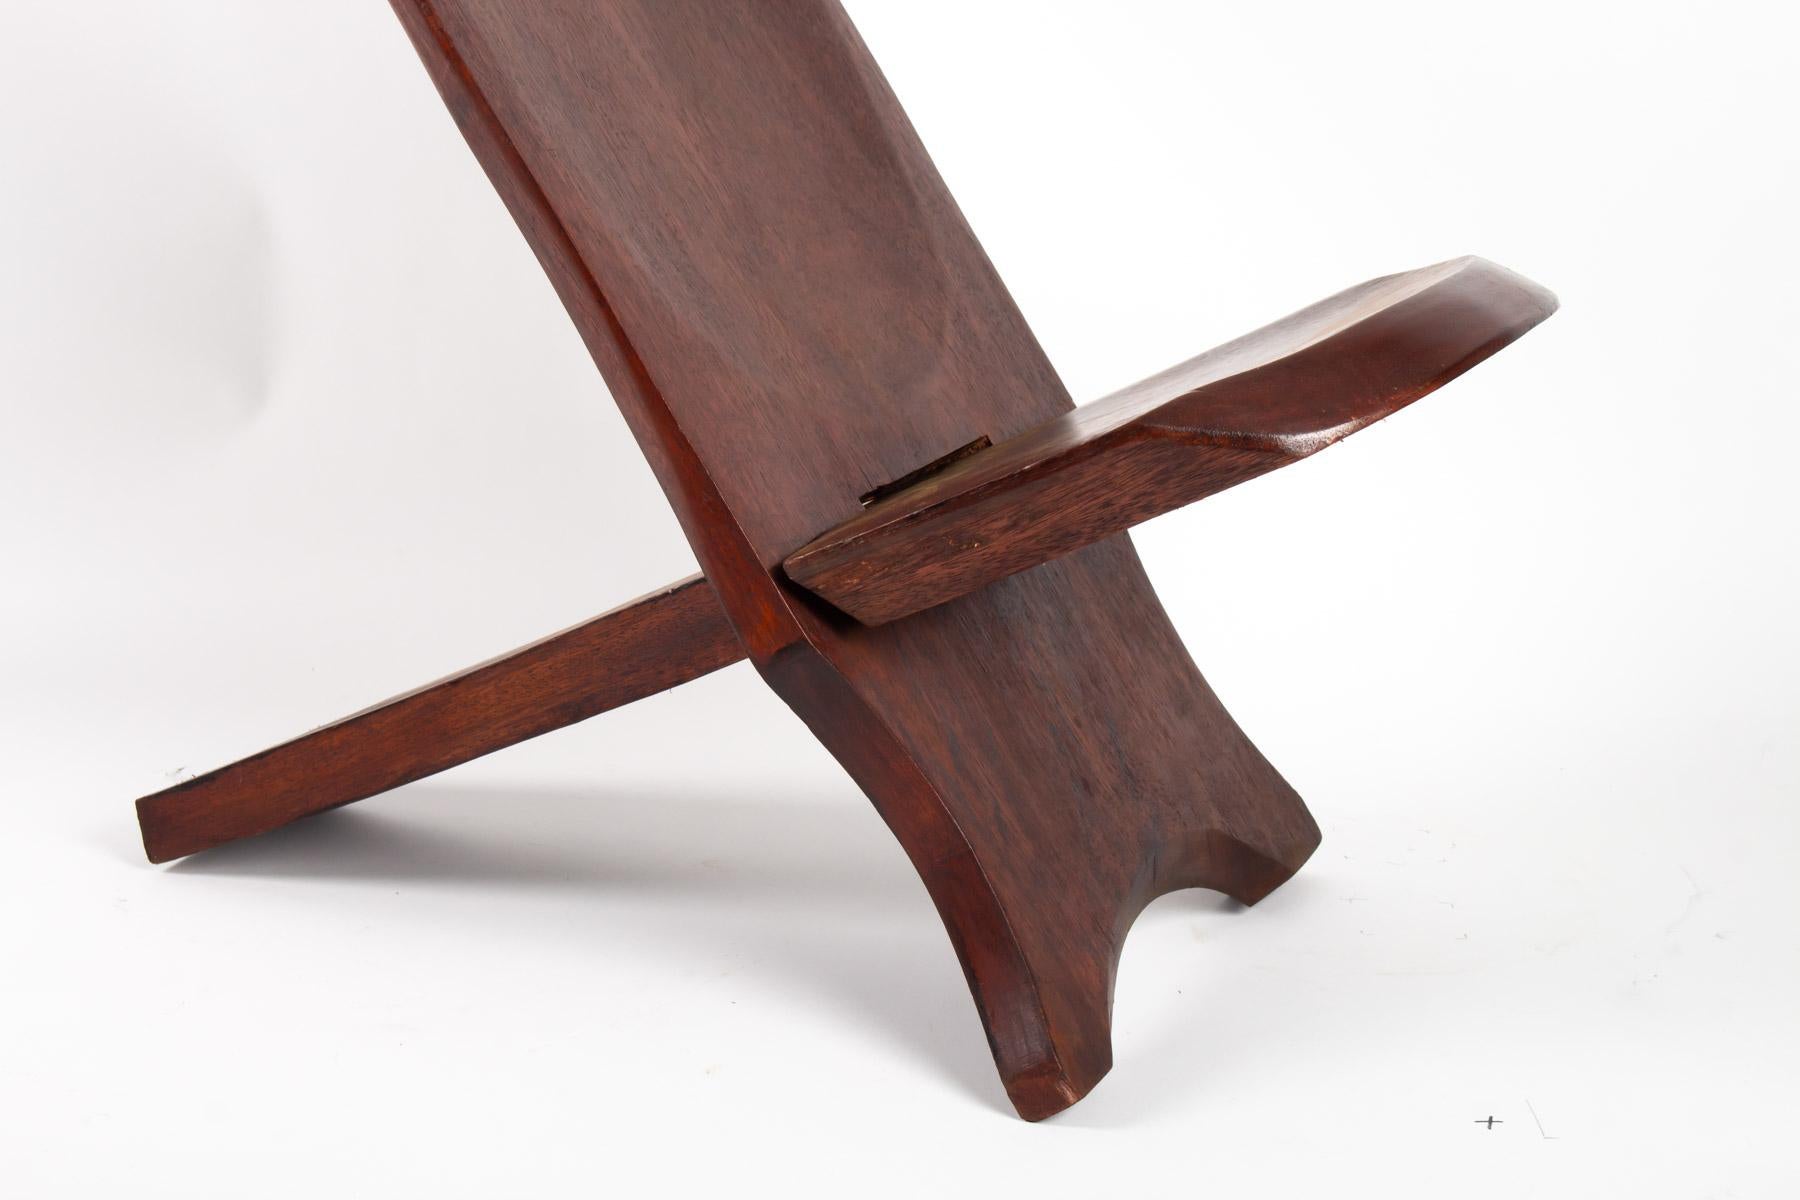 African seat in solid wood, 20th century
Measures: H 95 cm x W 70 cm D 38 cm.